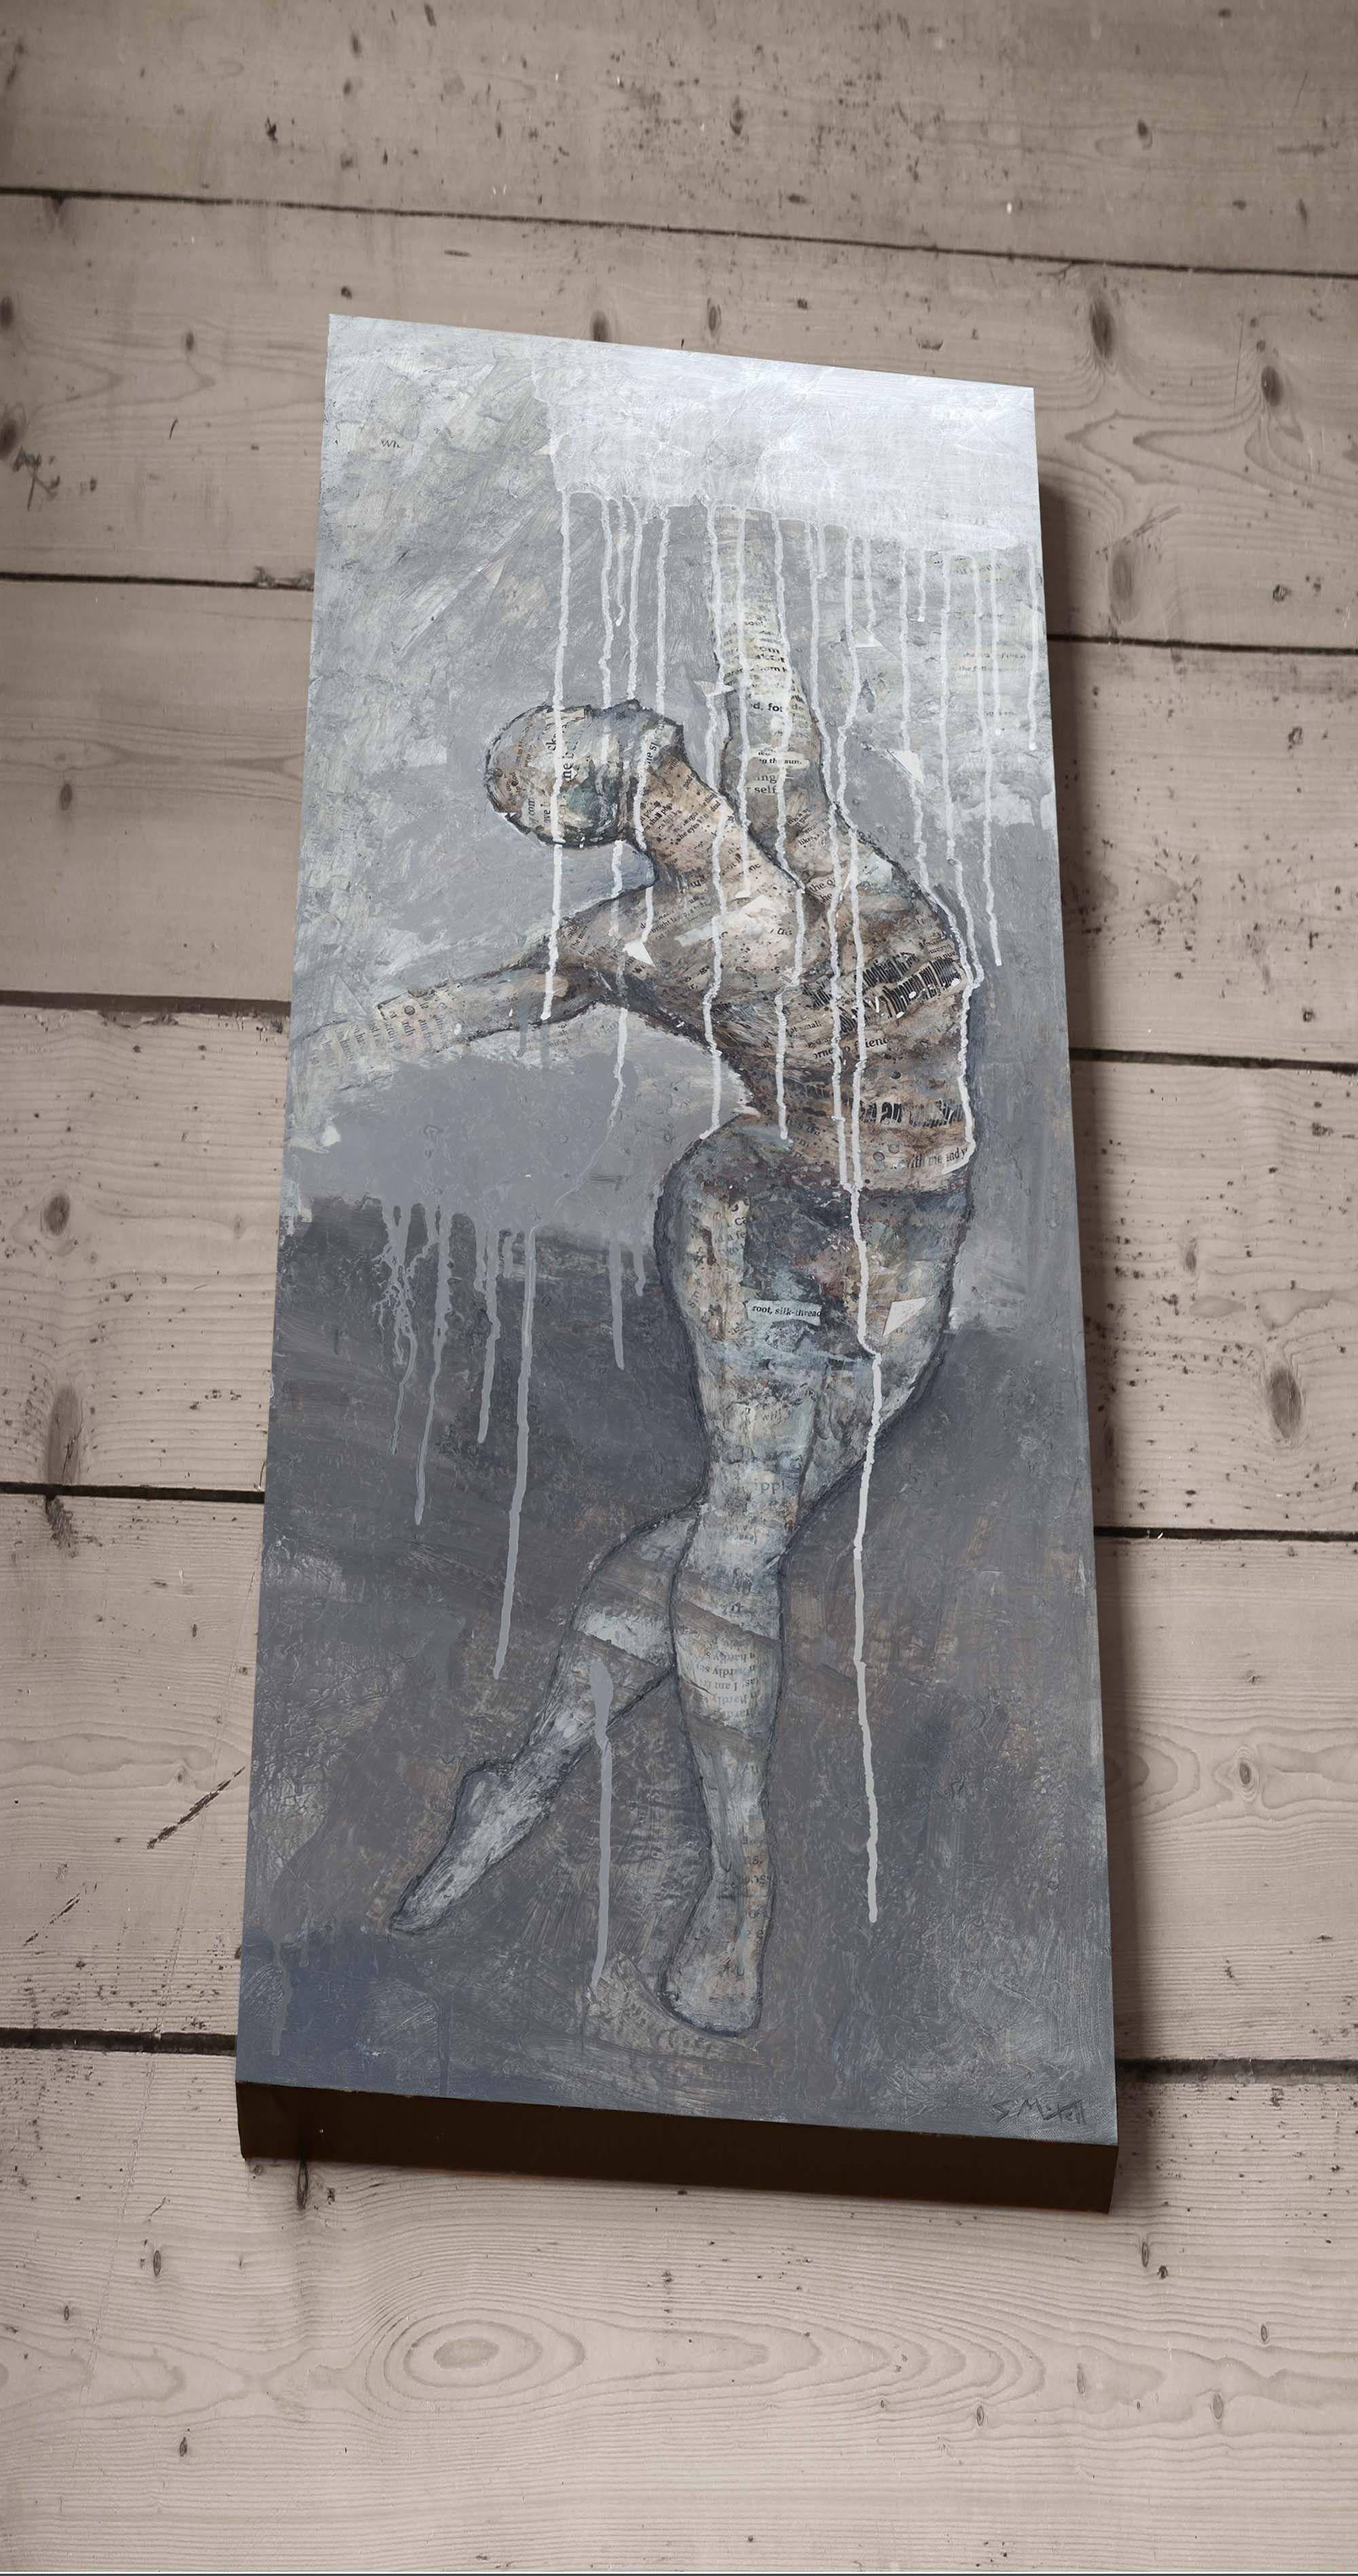 This is an original painting of a male figure. It is heavily textured, built up with layers of type, texture paste and acrylic paint. The body is filled with printed words of poetry, especially the poem 